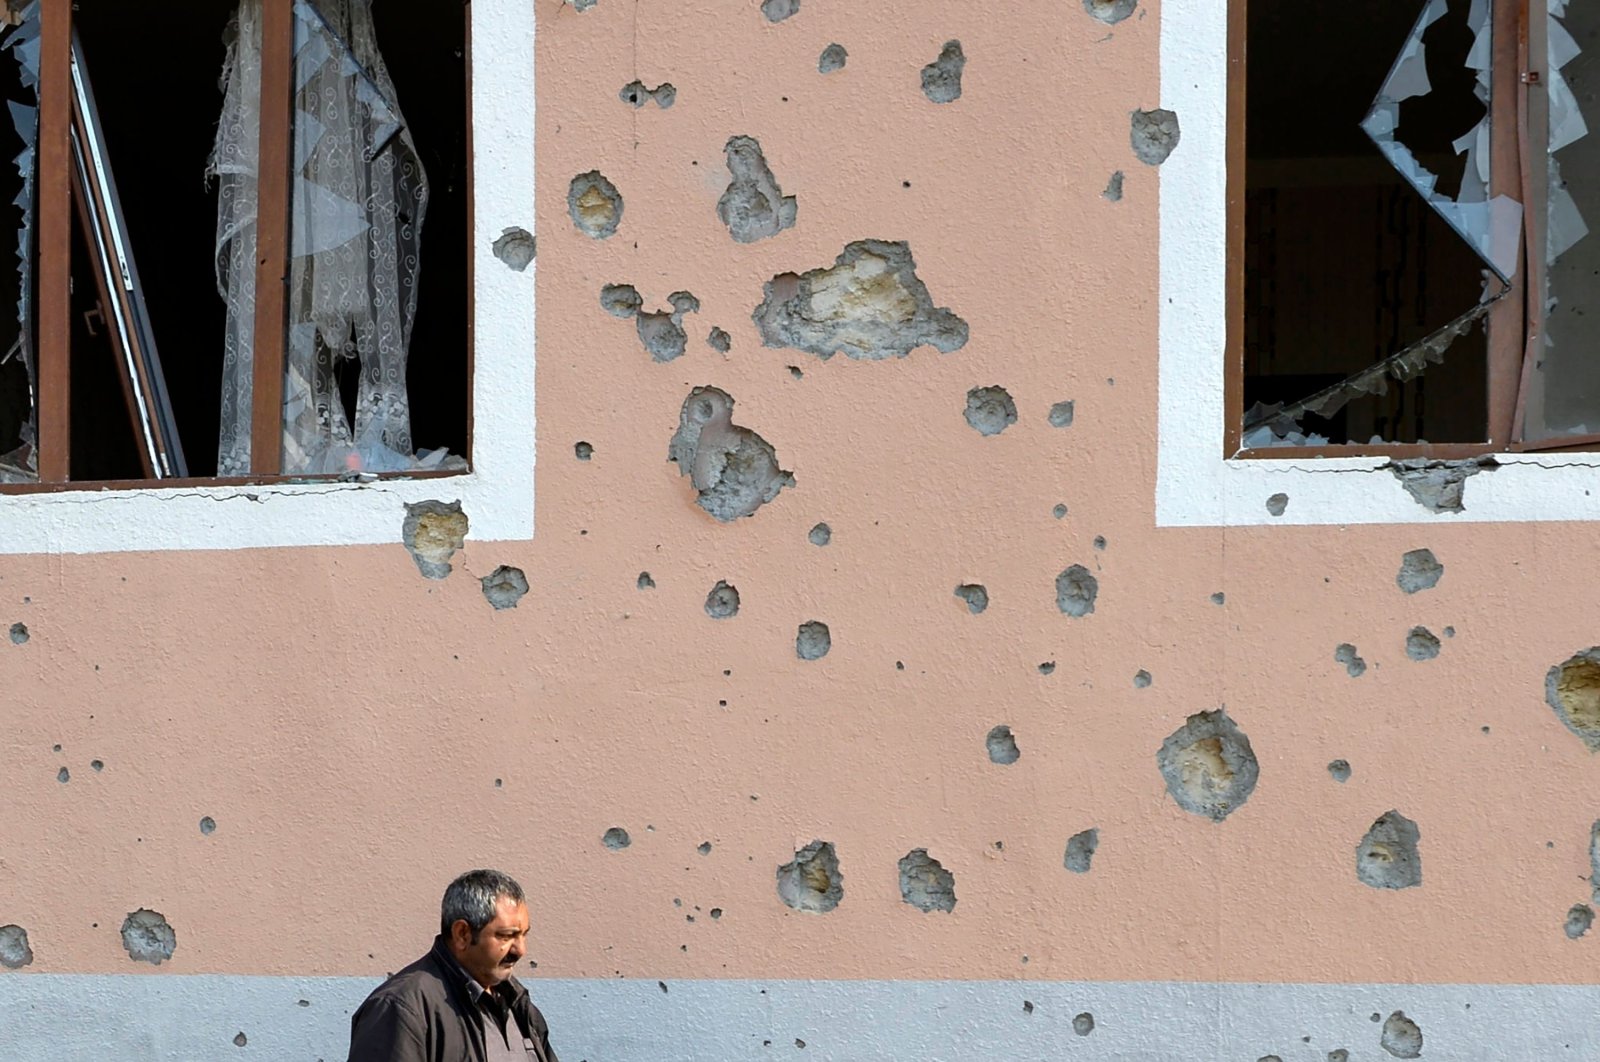 A man walks in front of a residential building damaged in Armenian shelling during the ongoing military conflict between Armenia and Azerbaijan over the Armenian-occupied region of Nagorno-Karabakh, in the town of Terter, Nov. 1, 2020. (AFP Photo)